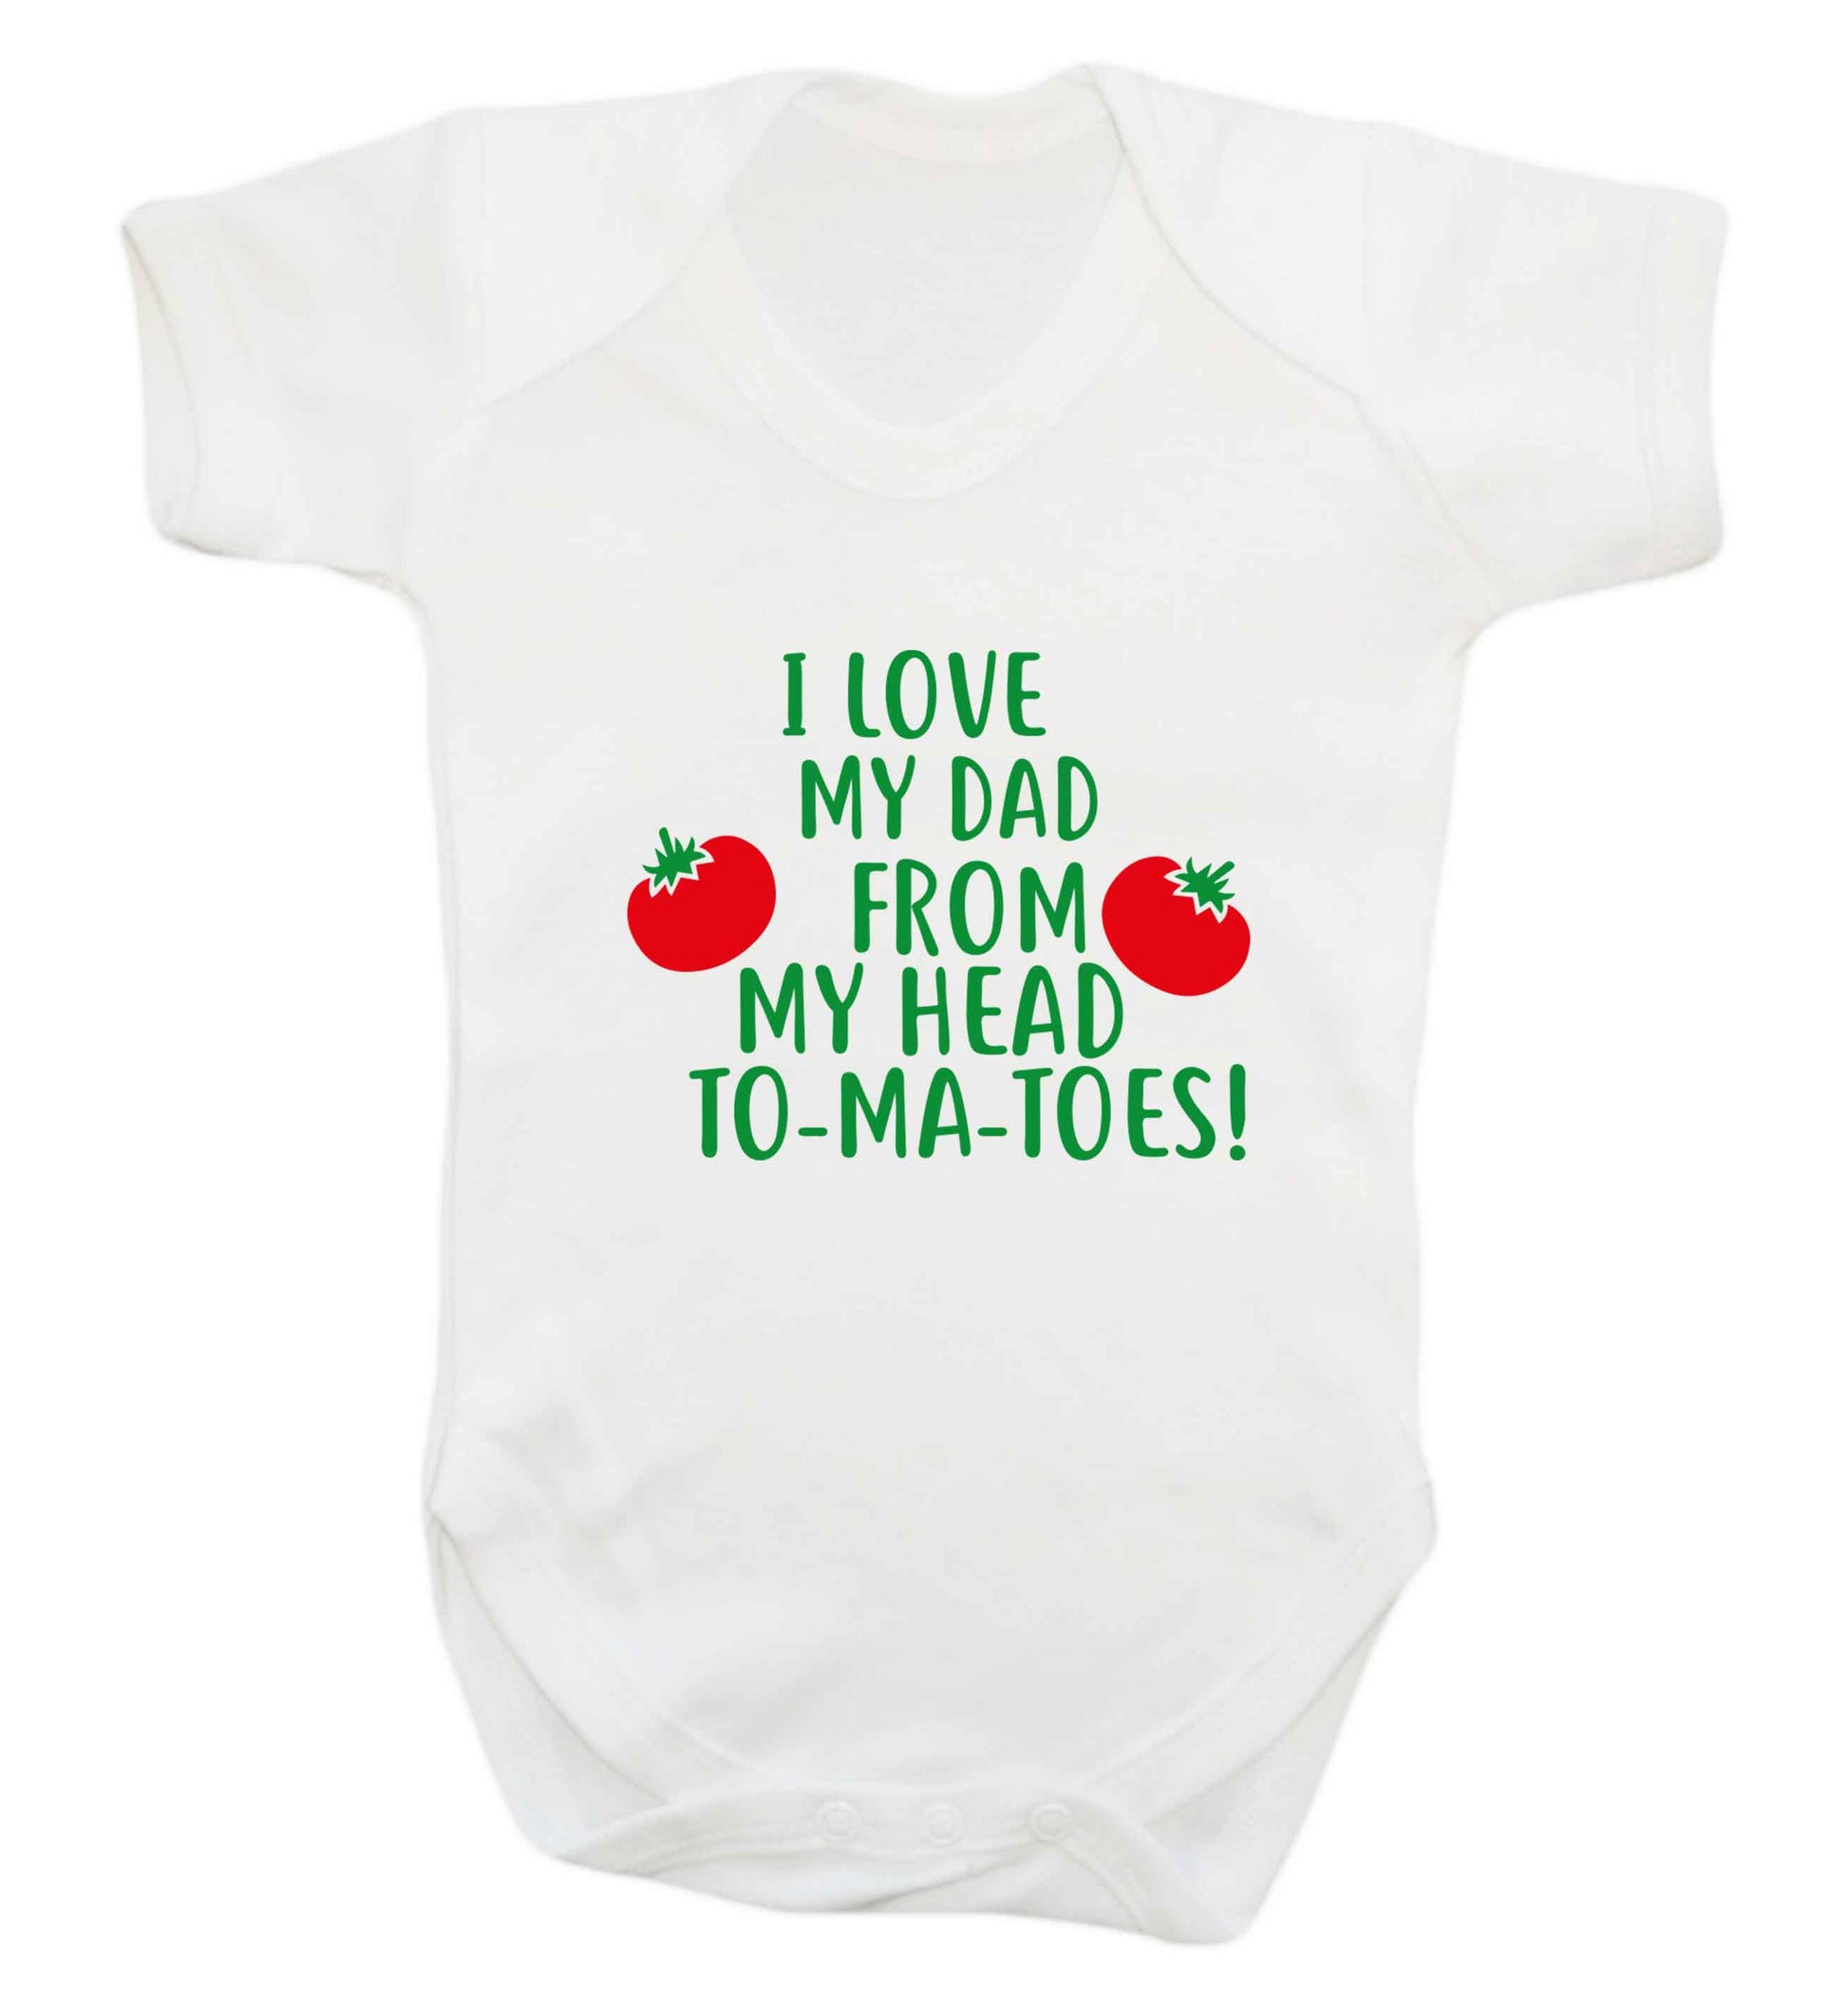 I love my dad from my head to-ma-toes baby vest white 18-24 months